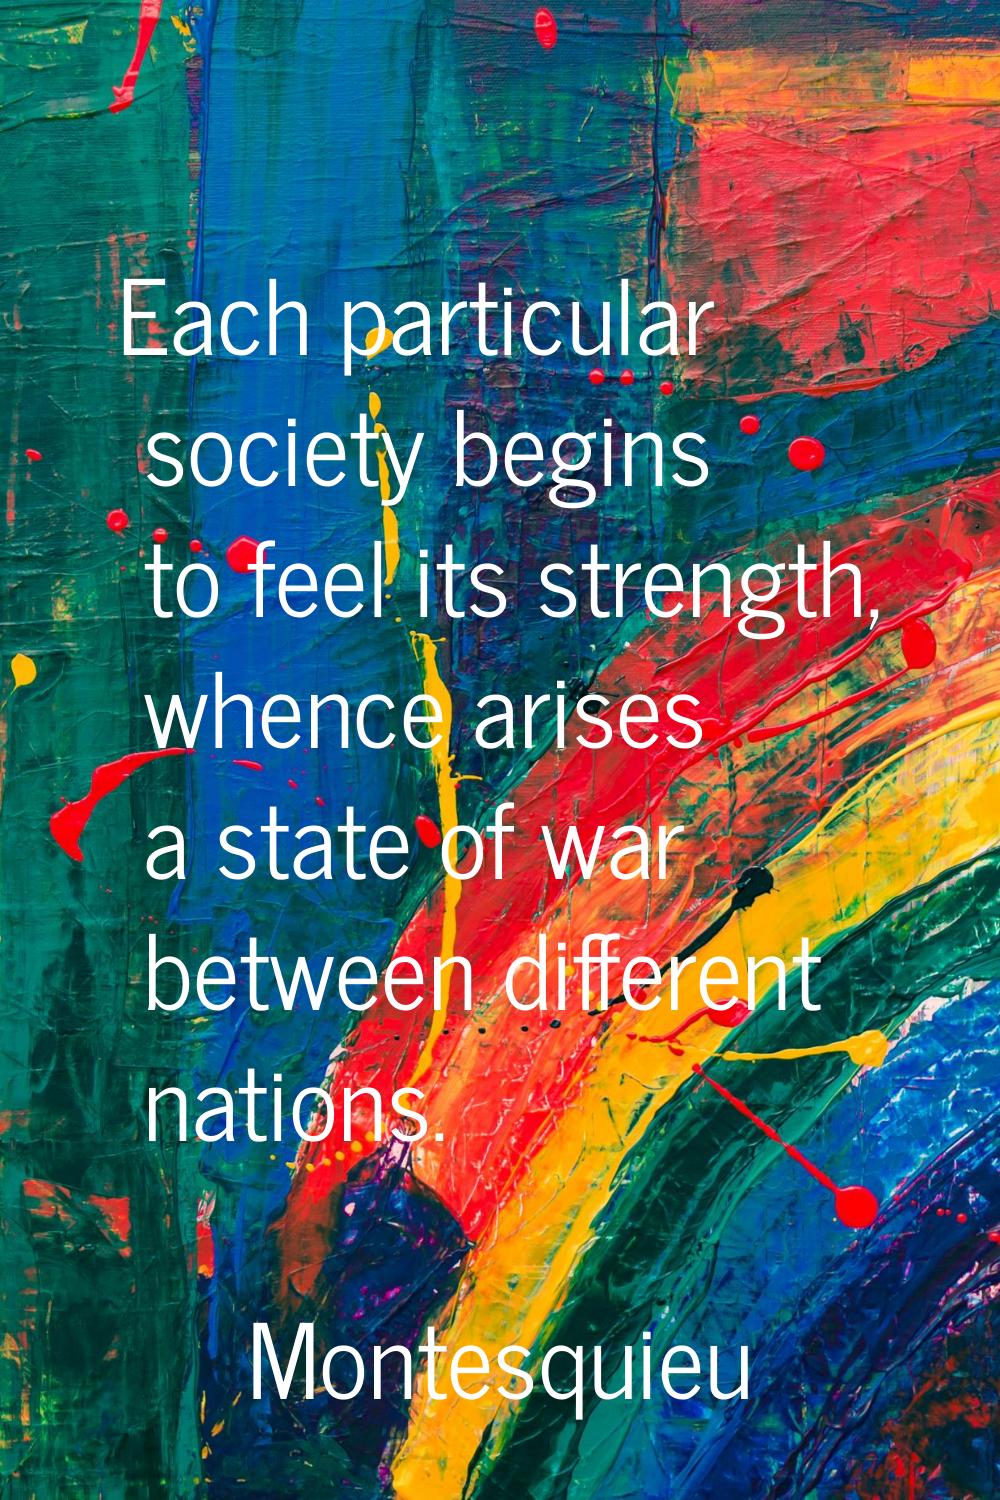 Each particular society begins to feel its strength, whence arises a state of war between different